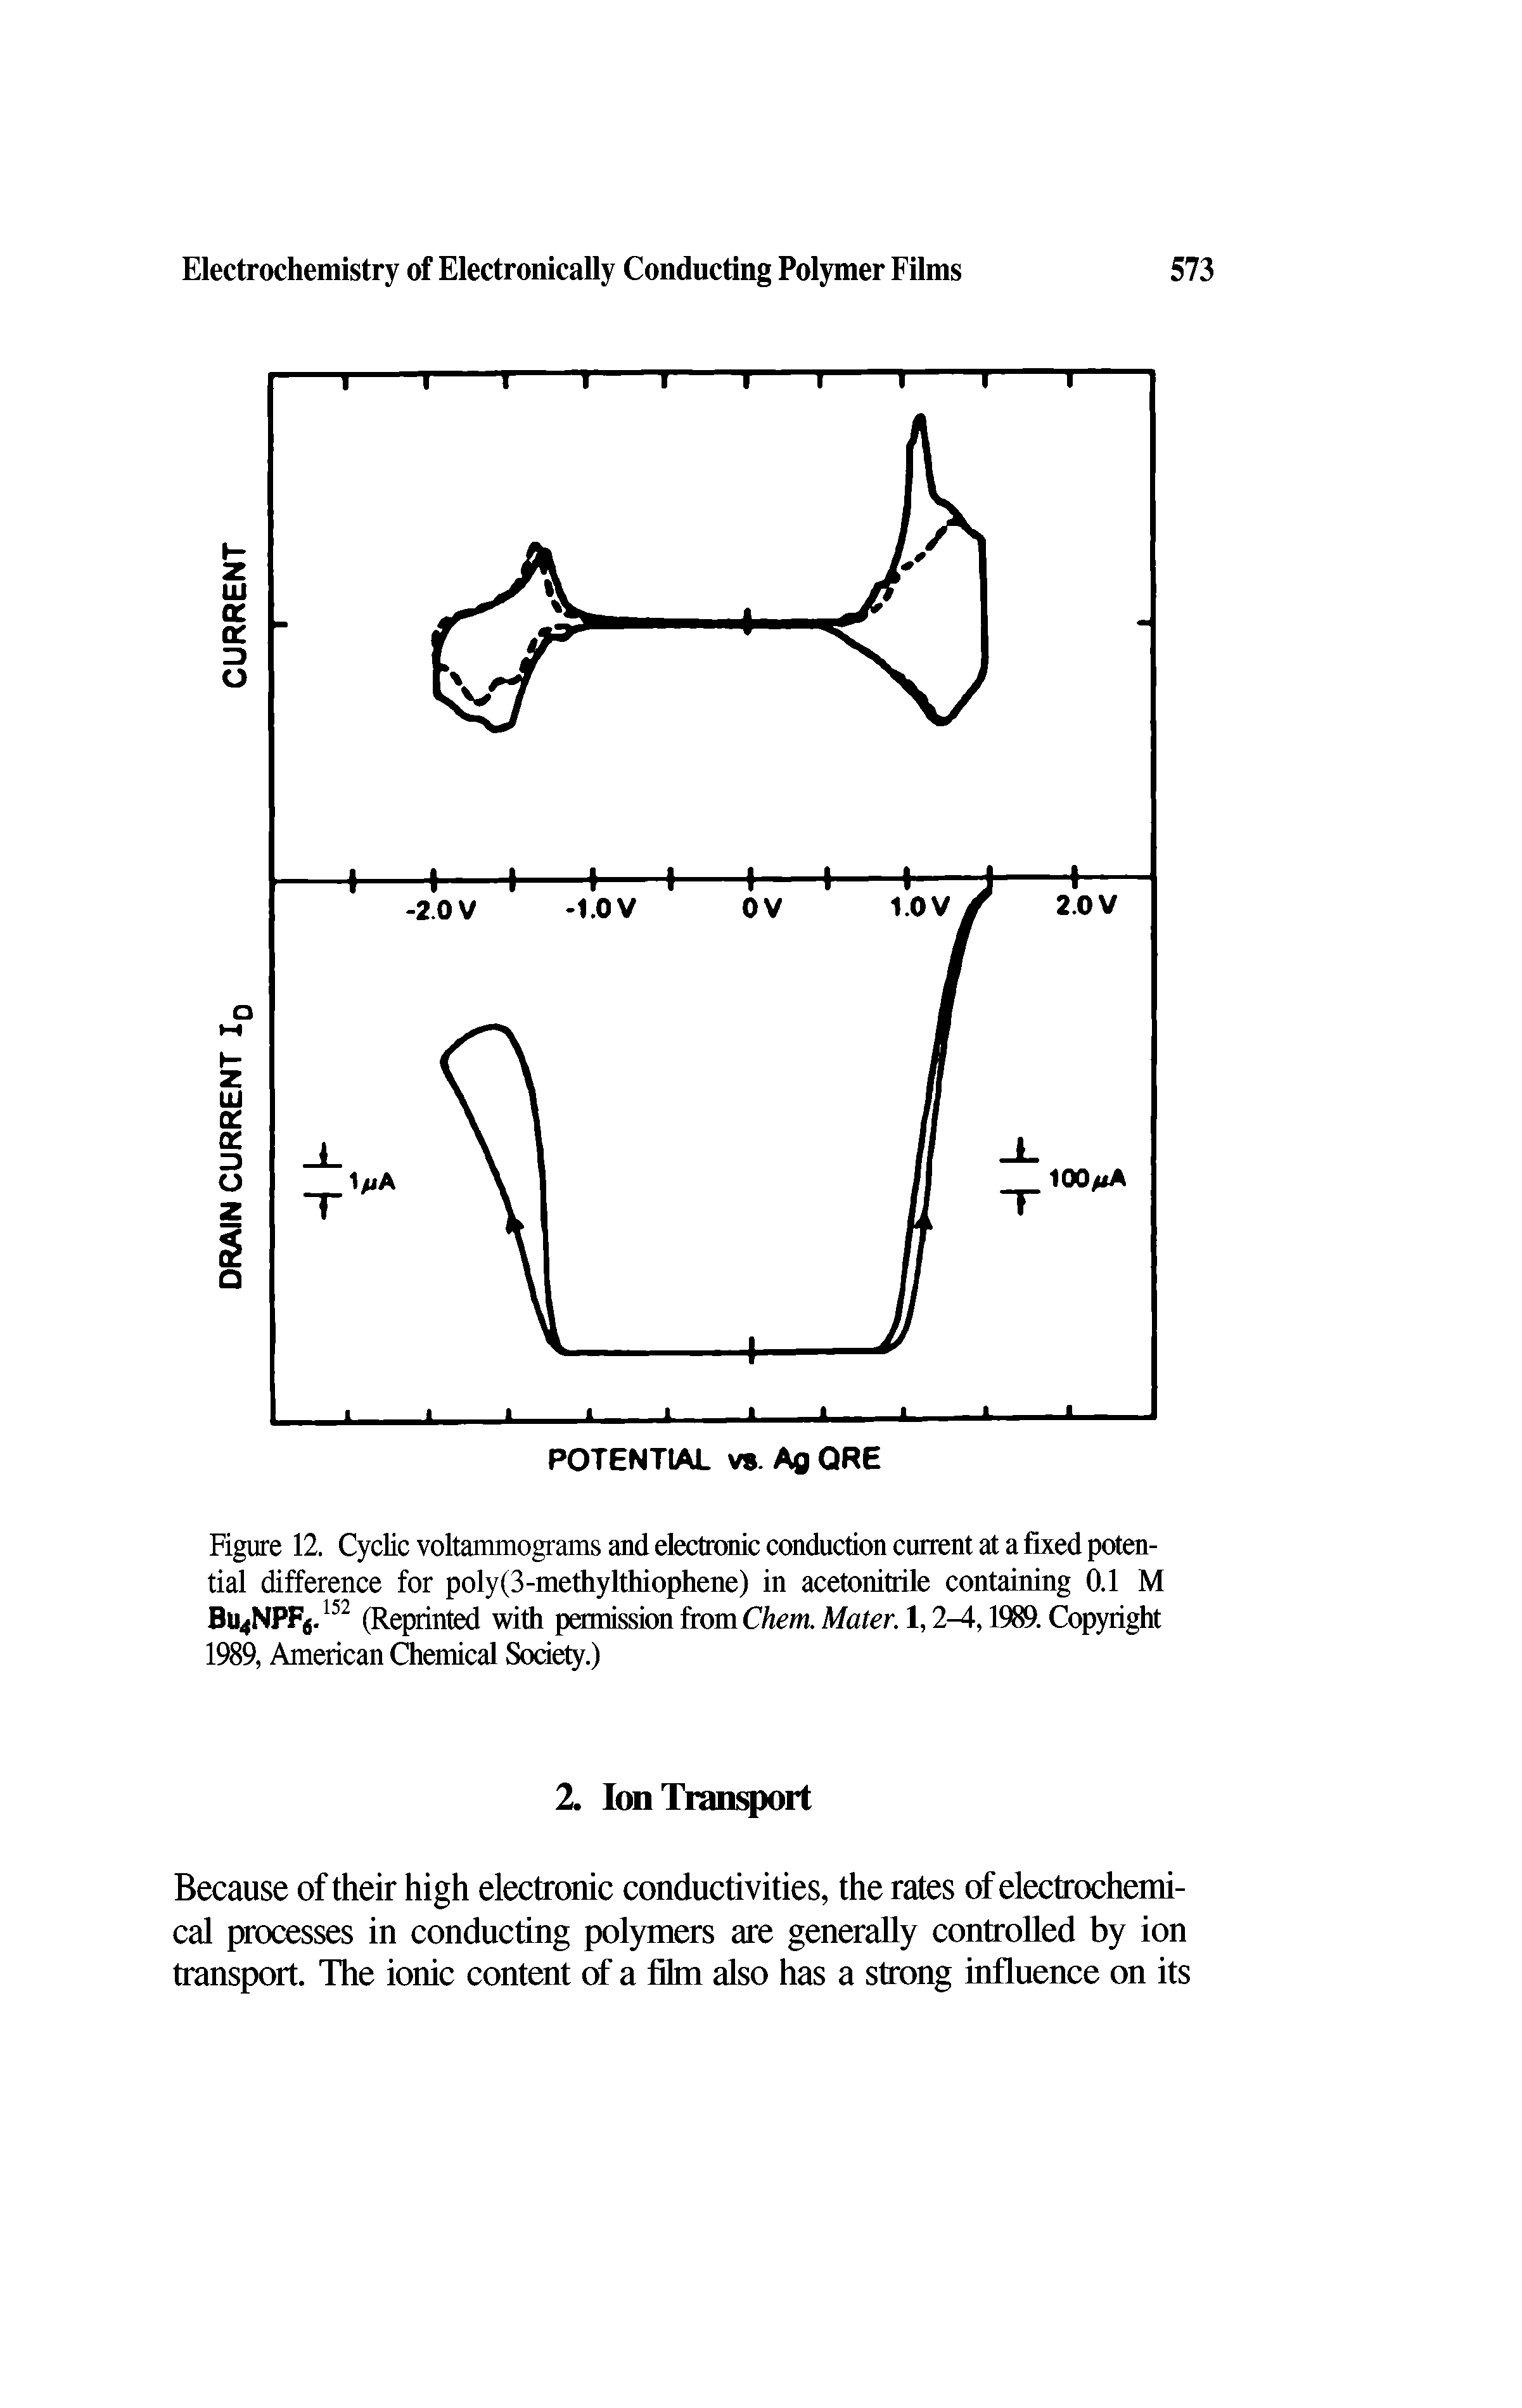 Figure 12. Cyclic voltammograms and electronic conduction current at a fixed potential difference for poly(3-methylthiophene) in acetonitrile containing 0.1 M Bu4NPF6. 152 (Reprinted with permission from Chem. Mater. 1,2-4,1989. Copyright 1989, American Chemical Society.)...